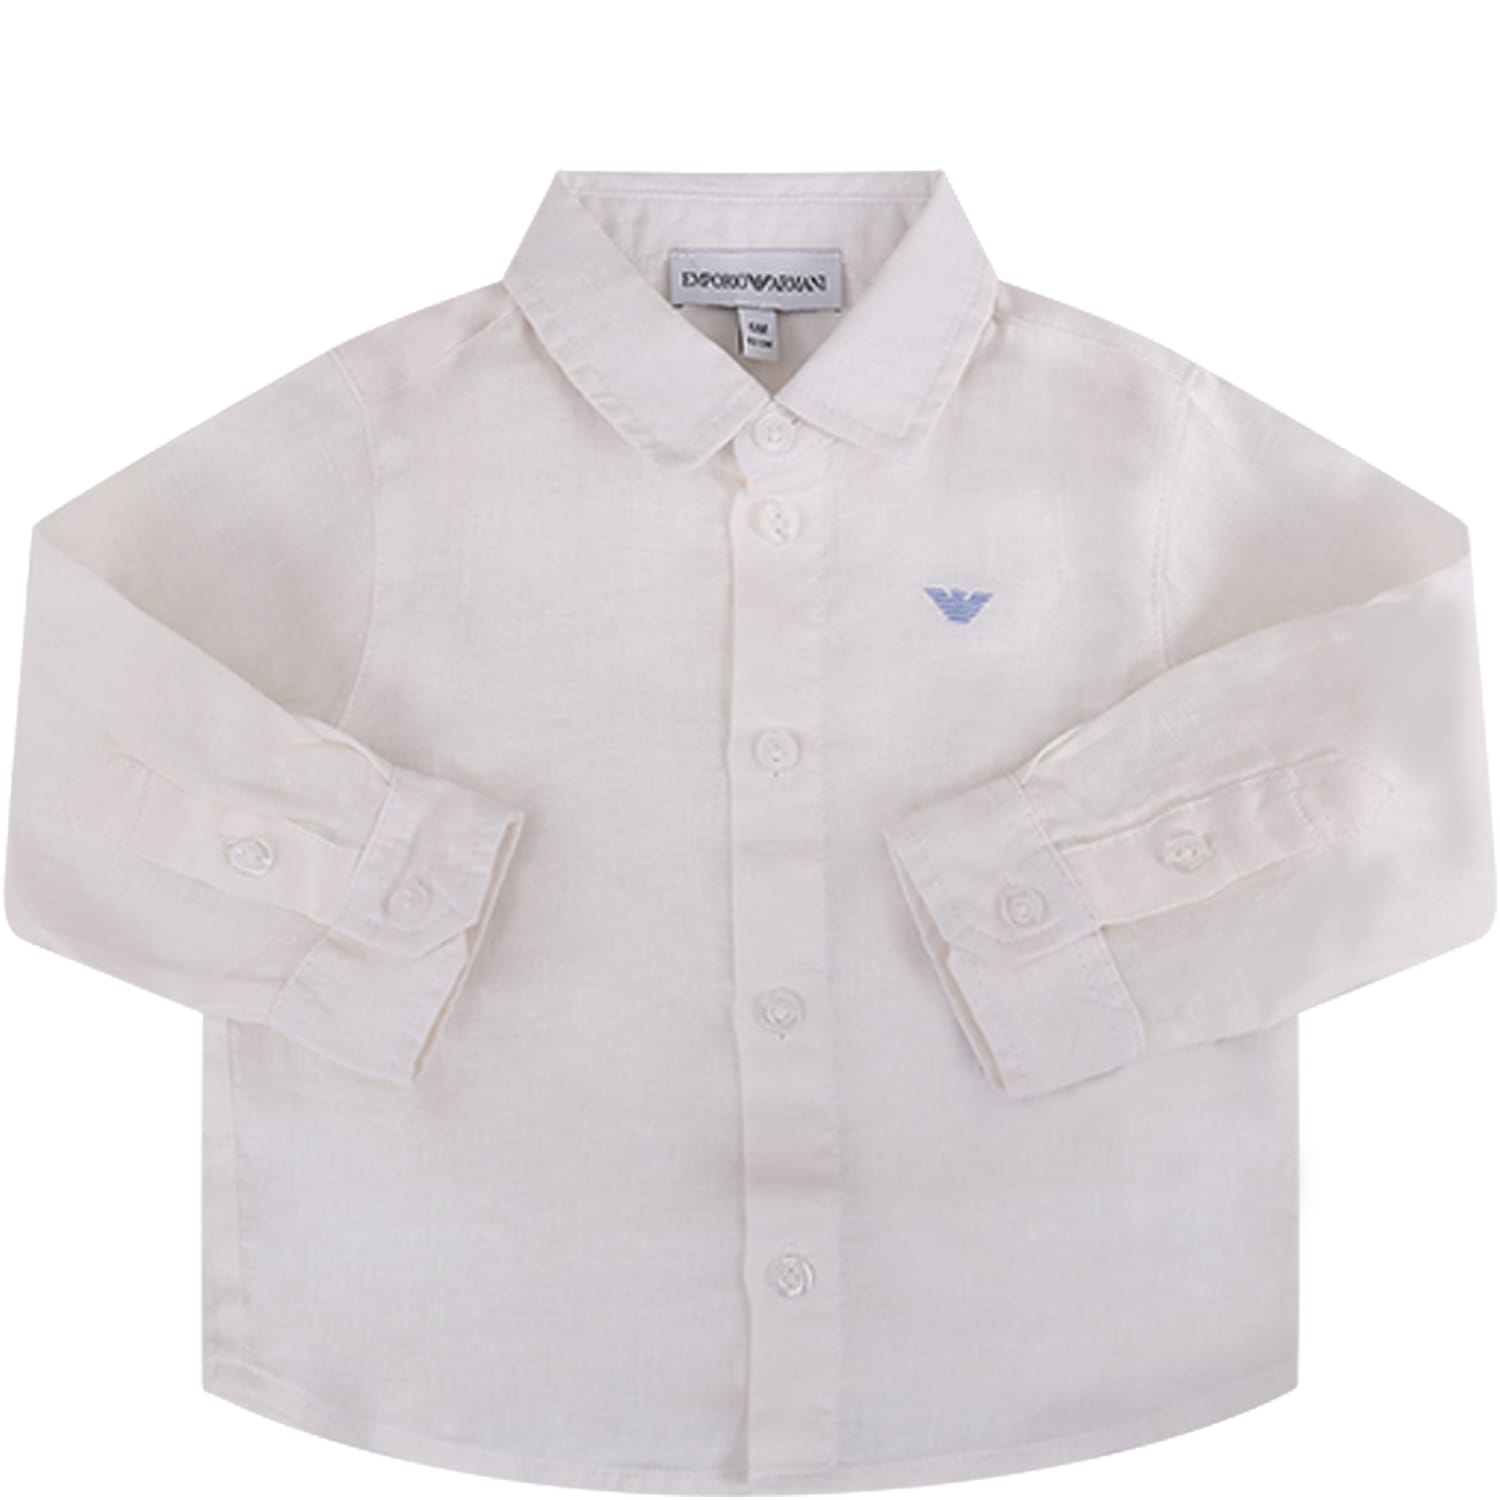 Armani Collezioni White Skirt For Baby Boy With Light Blue Iconic Eagle Logo